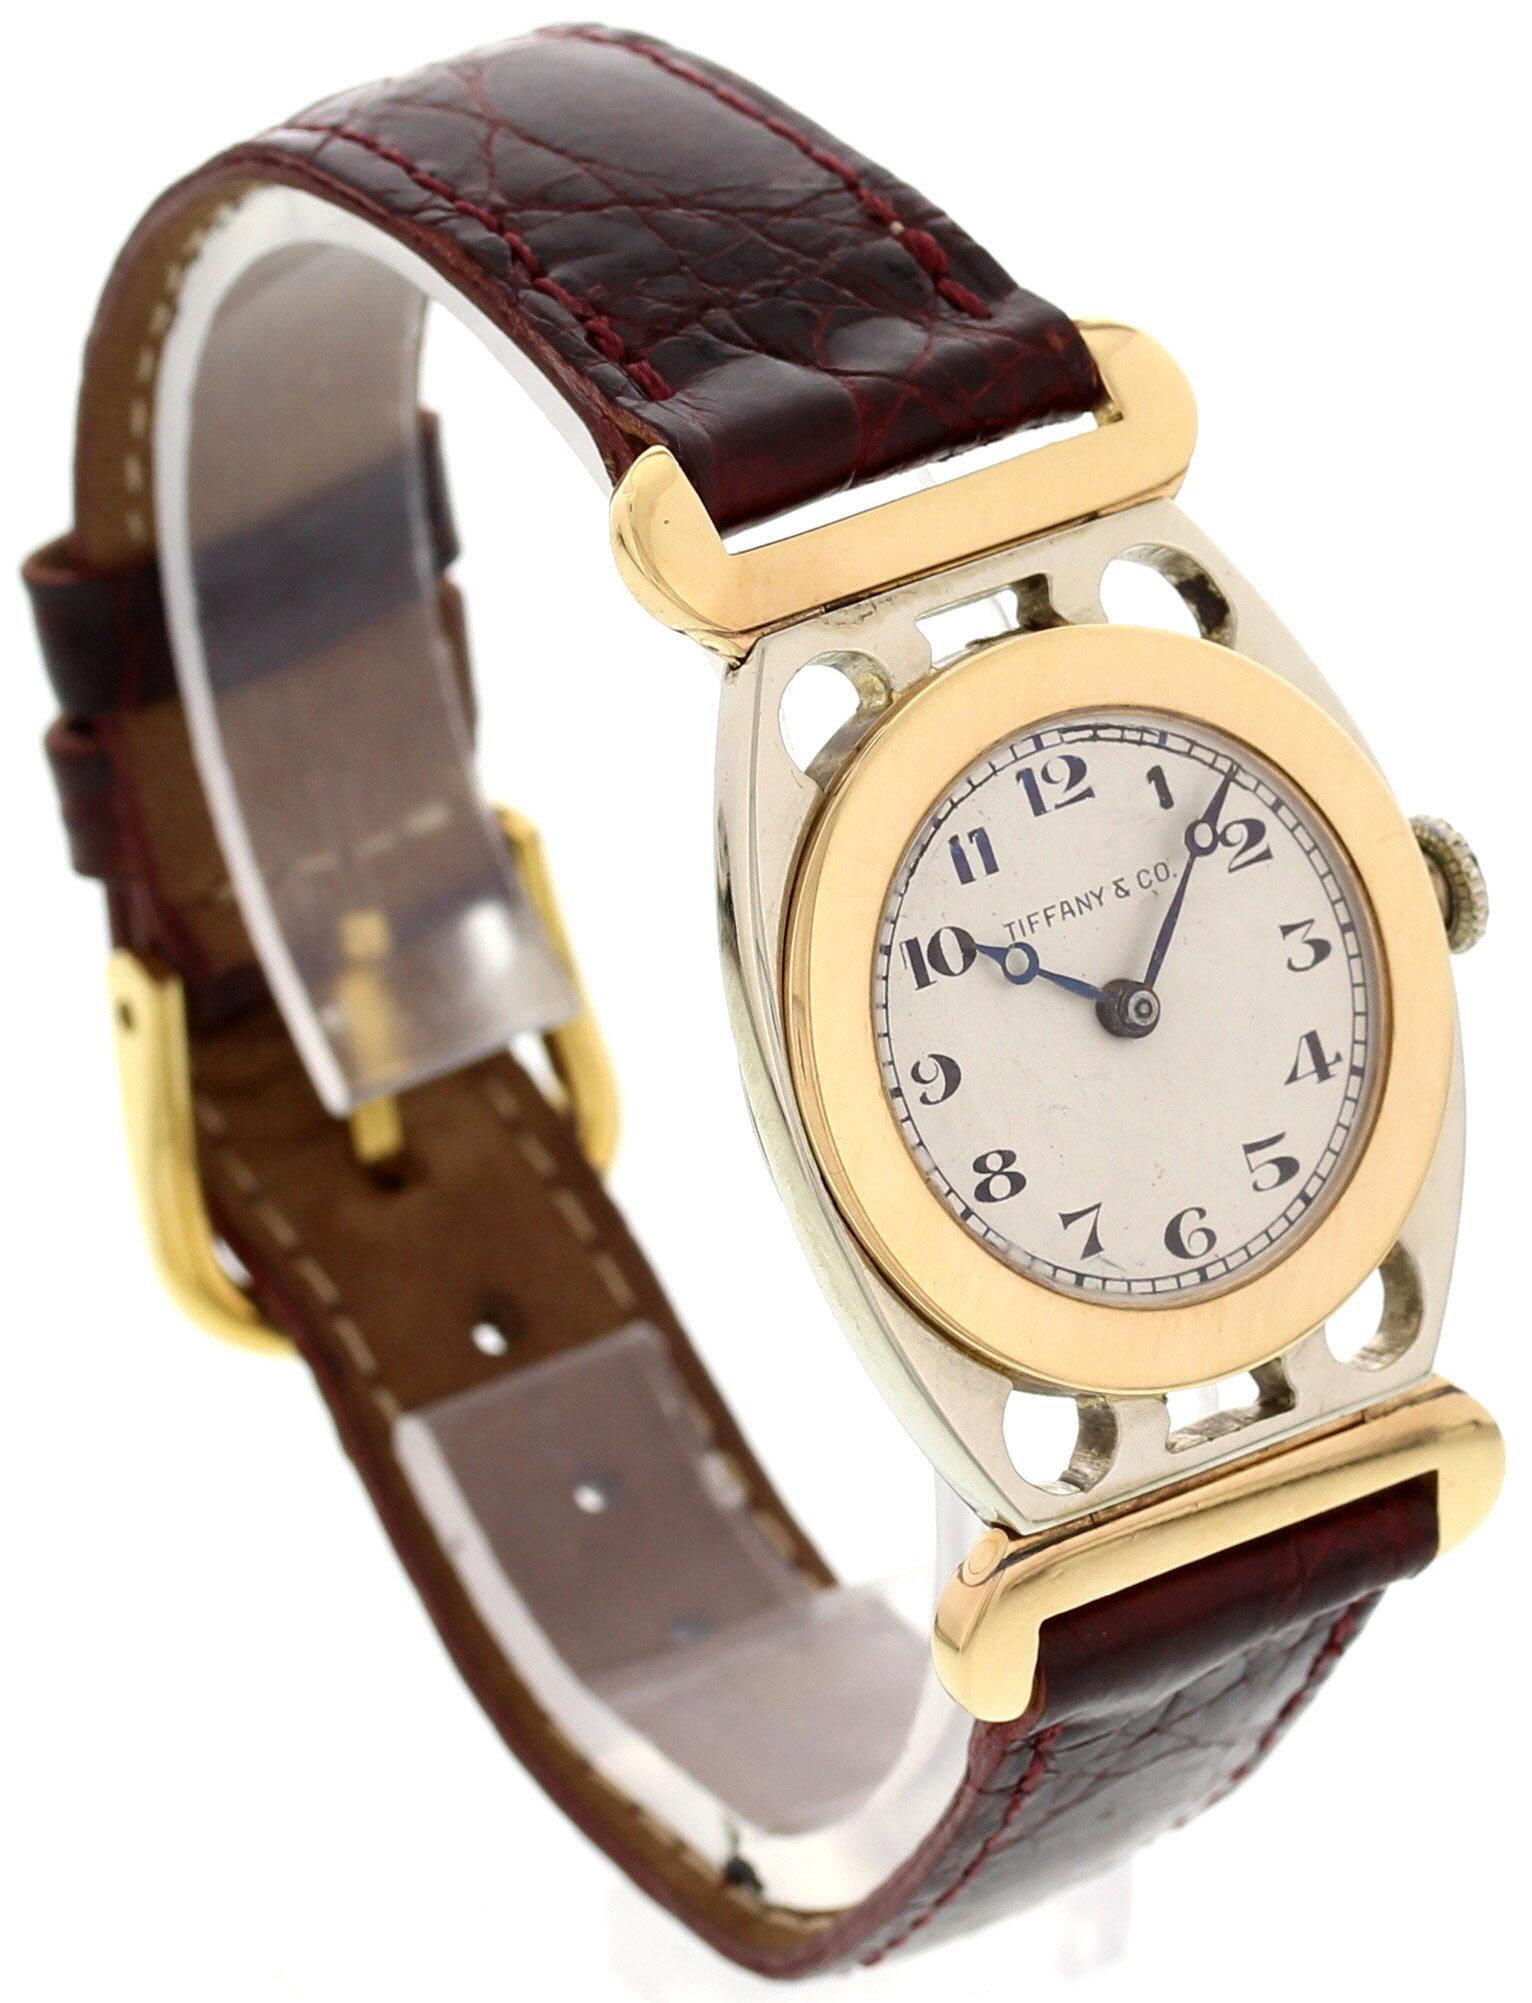 Ladies Tiffany & Co vintage watch. 26 mm 18k white gold case. 18k yellow gold fixed bezel. 18k yellow gold lugs. White dial with blue hands and black Arabic numerals. Adjustable red leather strap with gold tone stainless steel buckle. Mechanical